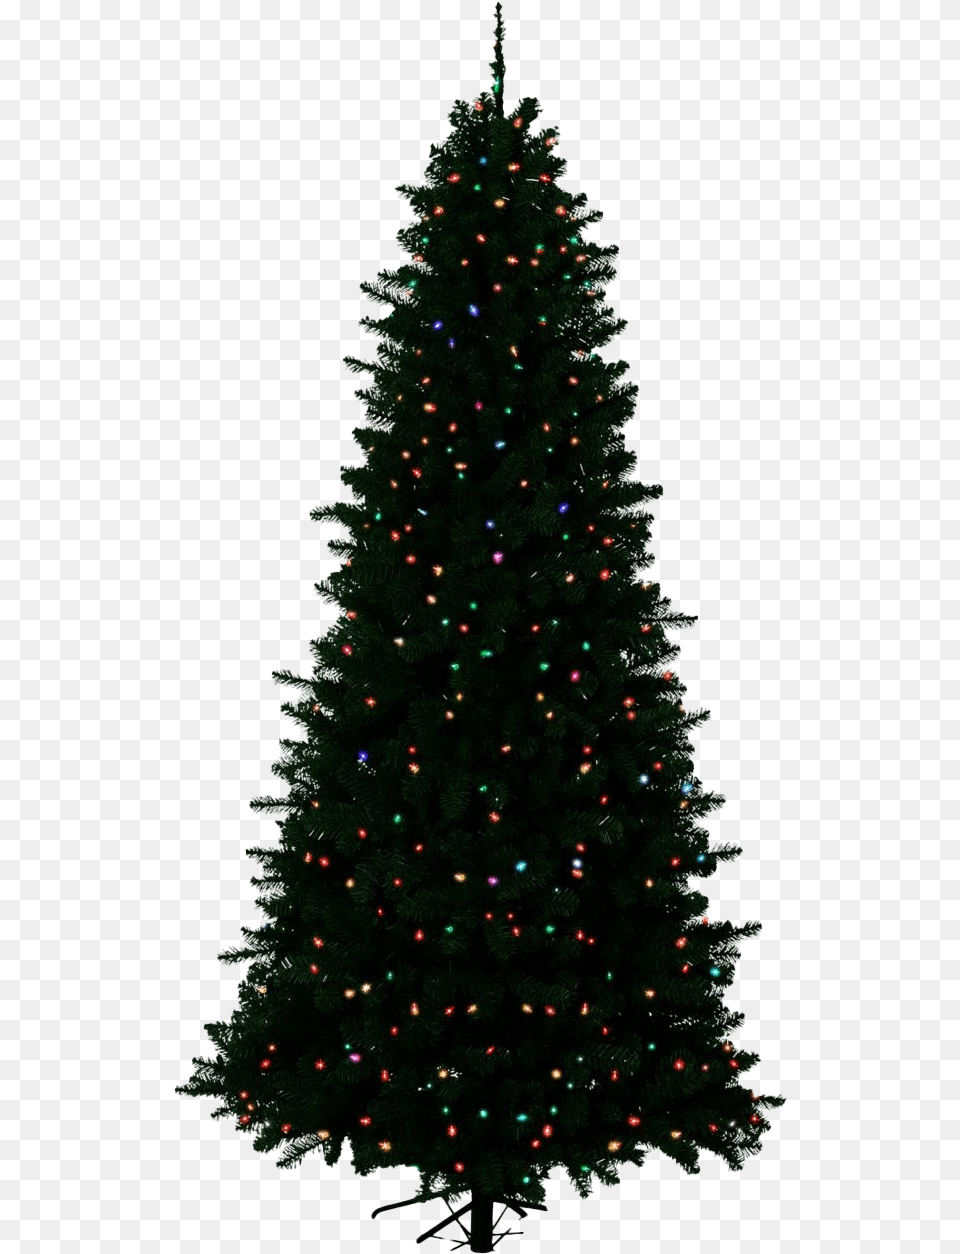 Artificial Christmas Tree Clipart 10 Foot Black Christmas Tree, Plant, Christmas Decorations, Festival, Christmas Tree Free Png Download